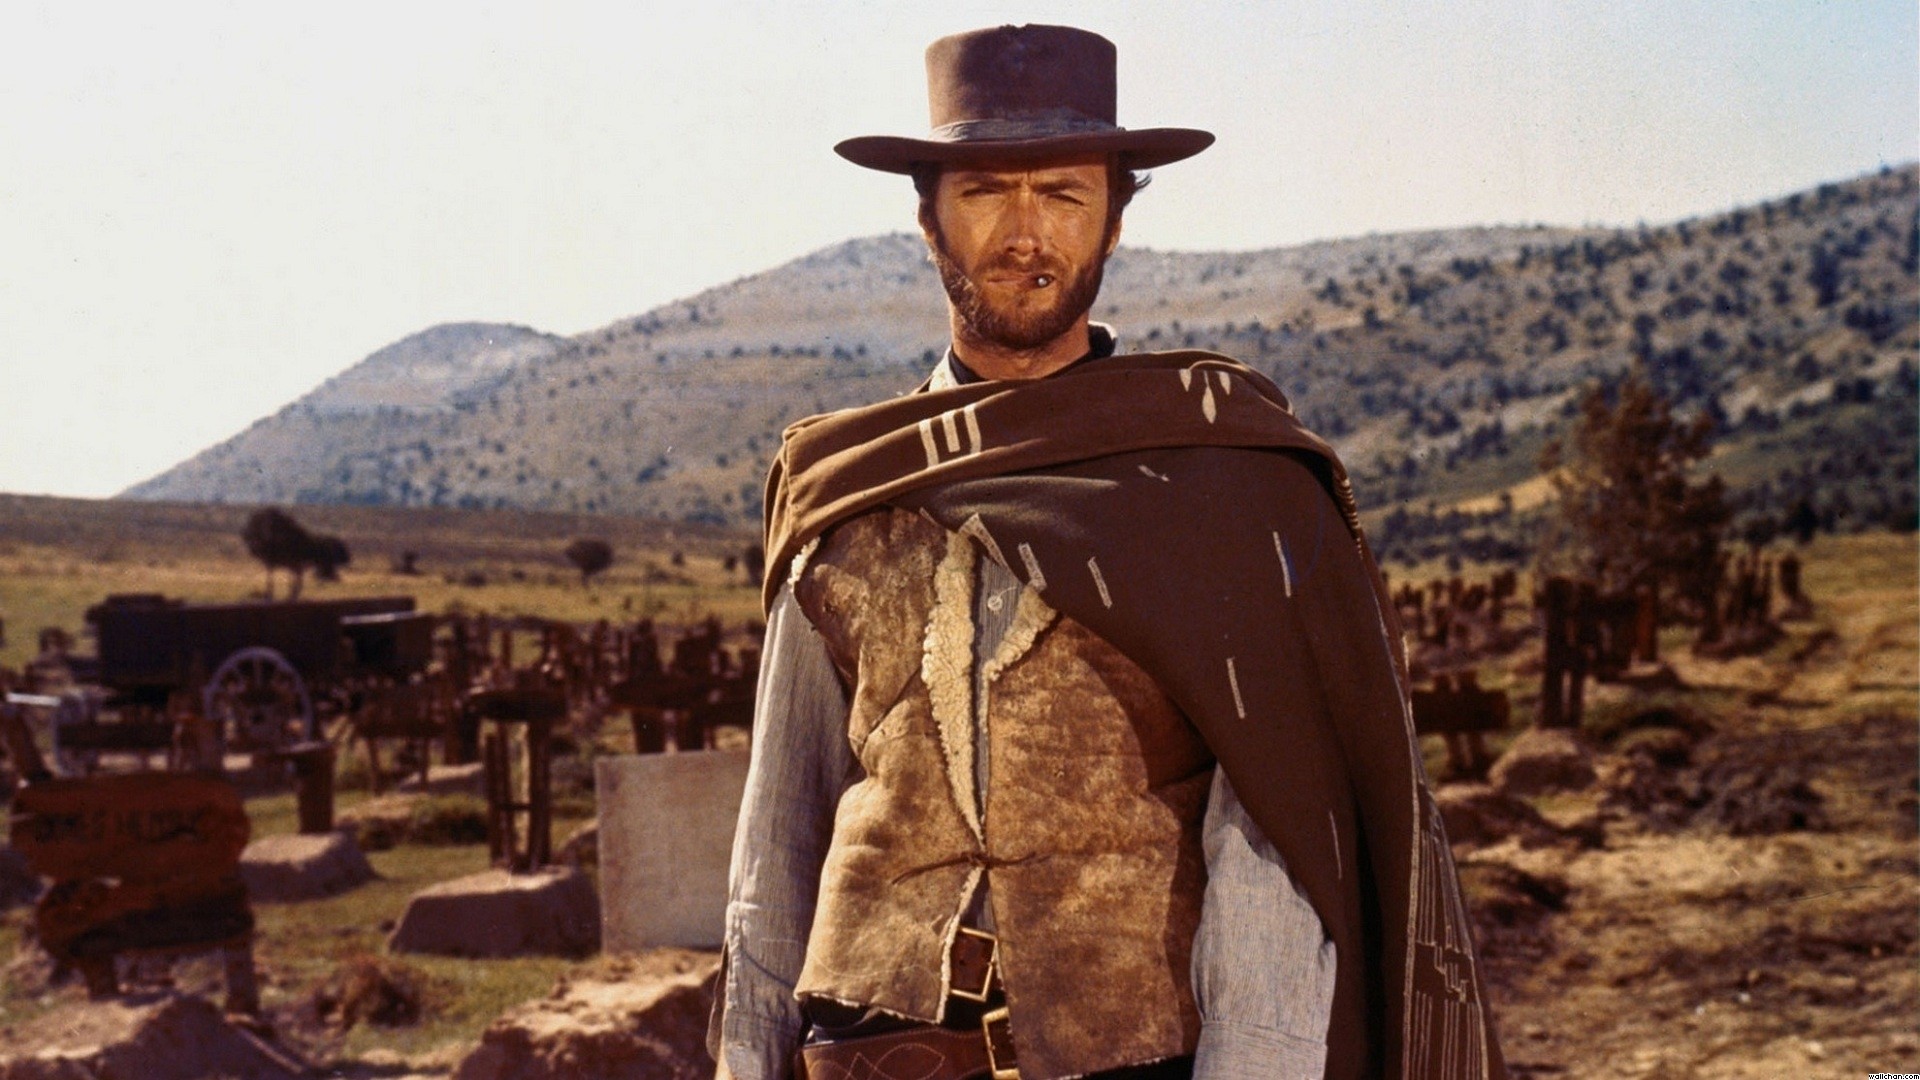 People 1920x1080 The Good, the Bad and the Ugly Clint Eastwood movies men western hat actor ponchos film stills